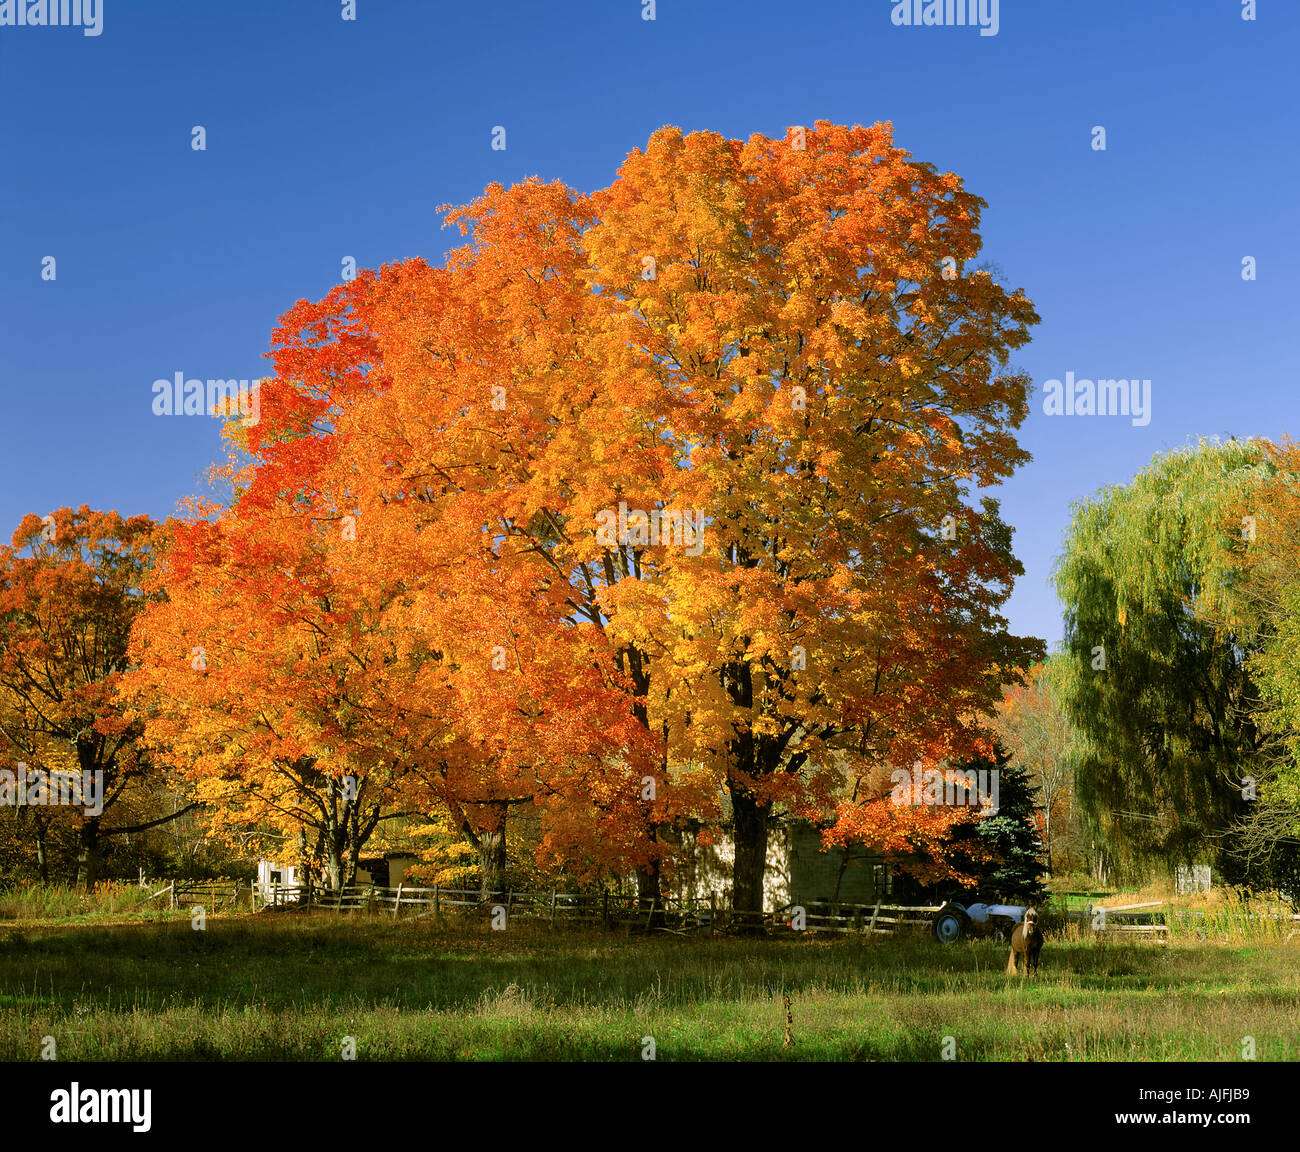 Autumn Maples and Pony, New Jersey Stock Photo